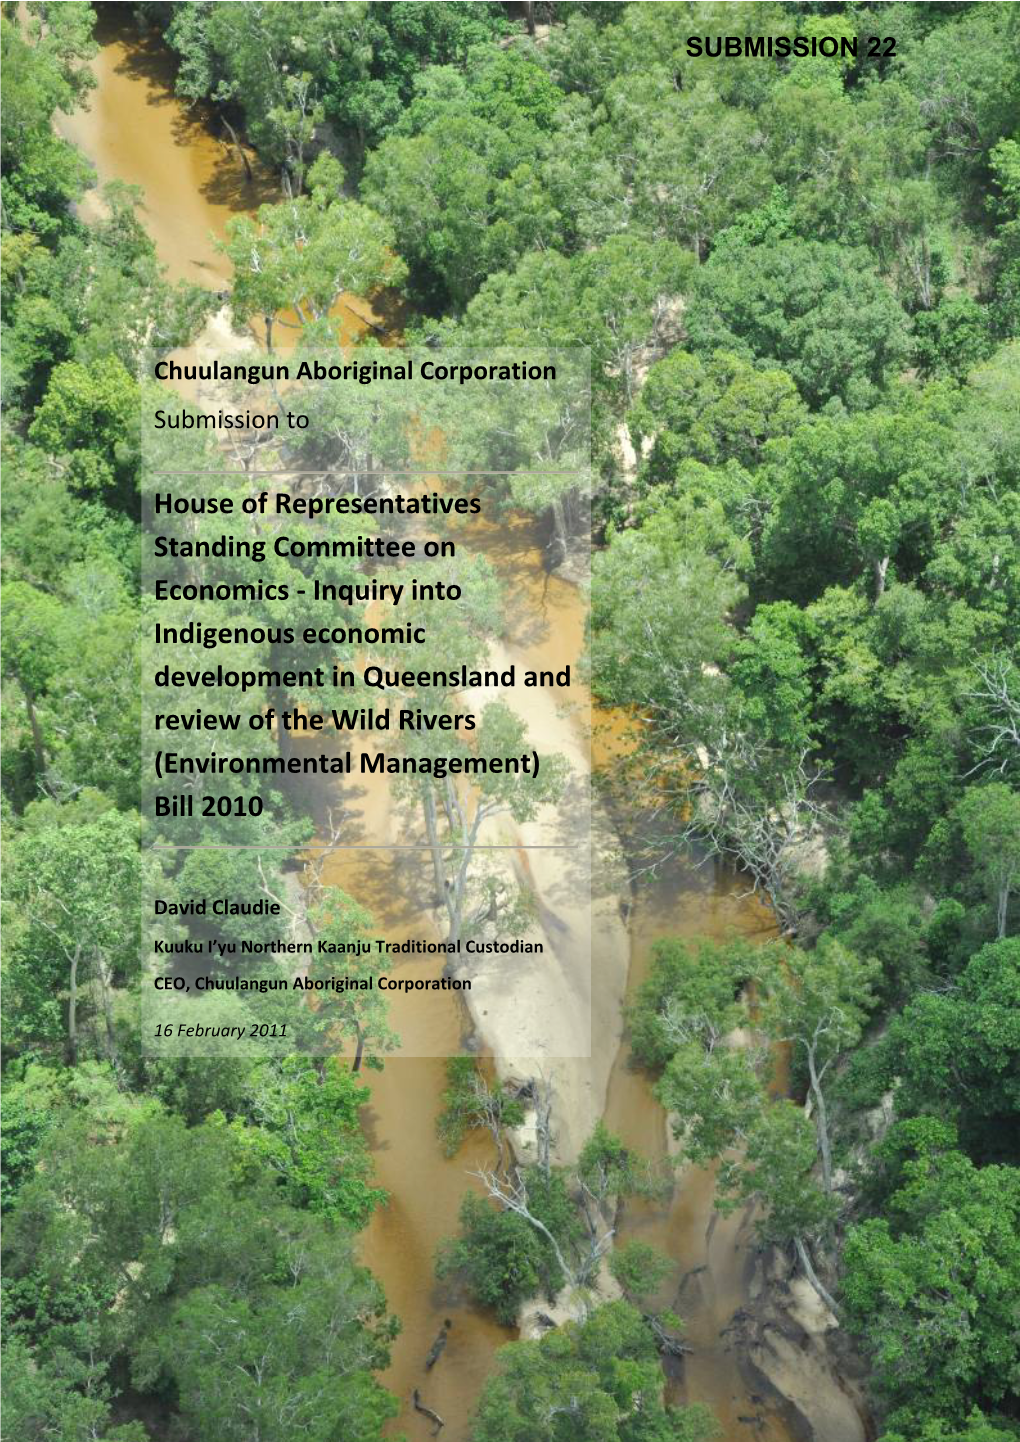 Inquiry Into Indigenous Economic Development in Queensland and Review of the Wild Rivers (Environmental Management) Bill 2010